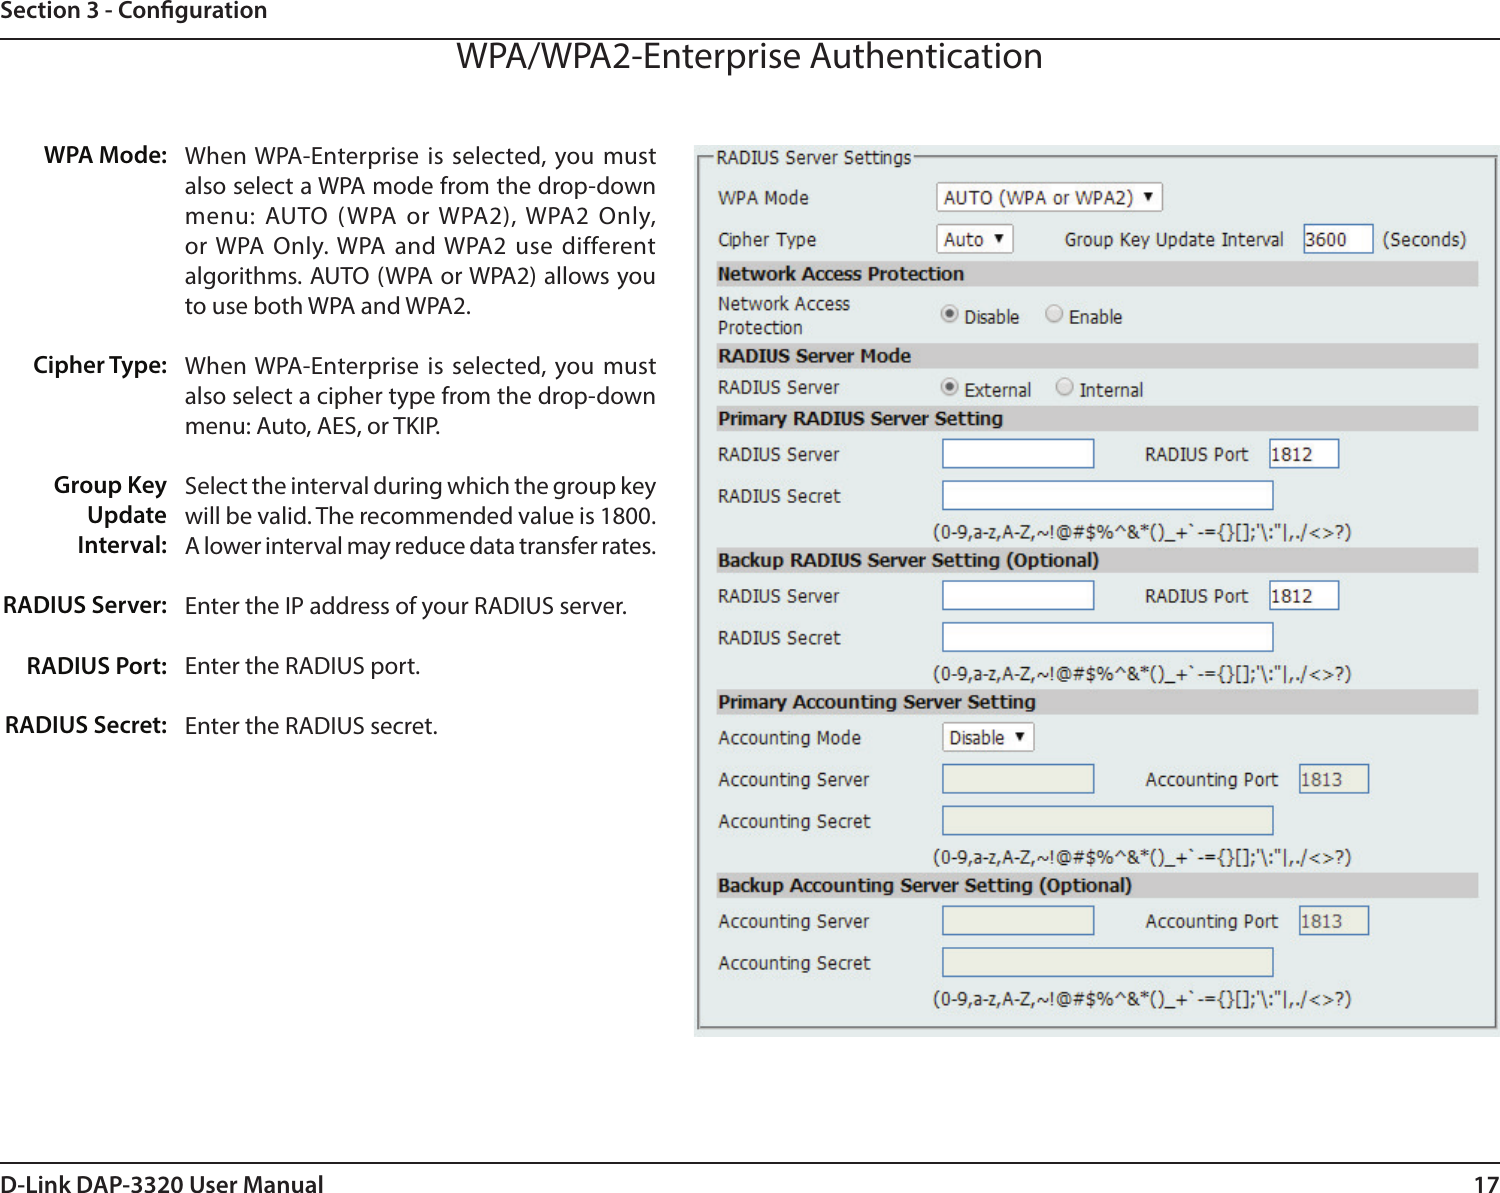 17D-Link DAP-3320 User ManualSection 3 - CongurationWPA/WPA2-Enterprise AuthenticationWhen WPA-Enterprise is selected, you must also select a WPA mode from the drop-down menu: AUTO (WPA or WPA2), WPA2 Only, or WPA Only. WPA and WPA2 use different algorithms. AUTO (WPA or WPA2) allows you to use both WPA and WPA2. When WPA-Enterprise is selected, you must also select a cipher type from the drop-down menu: Auto, AES, or TKIP.Select the interval during which the group key will be valid. The recommended value is 1800. A lower interval may reduce data transfer rates.Enter the IP address of your RADIUS server.Enter the RADIUS port.Enter the RADIUS secret.WPA Mode: Cipher Type:Group Key Update Interval:RADIUS Server:RADIUS Port:RADIUS Secret: